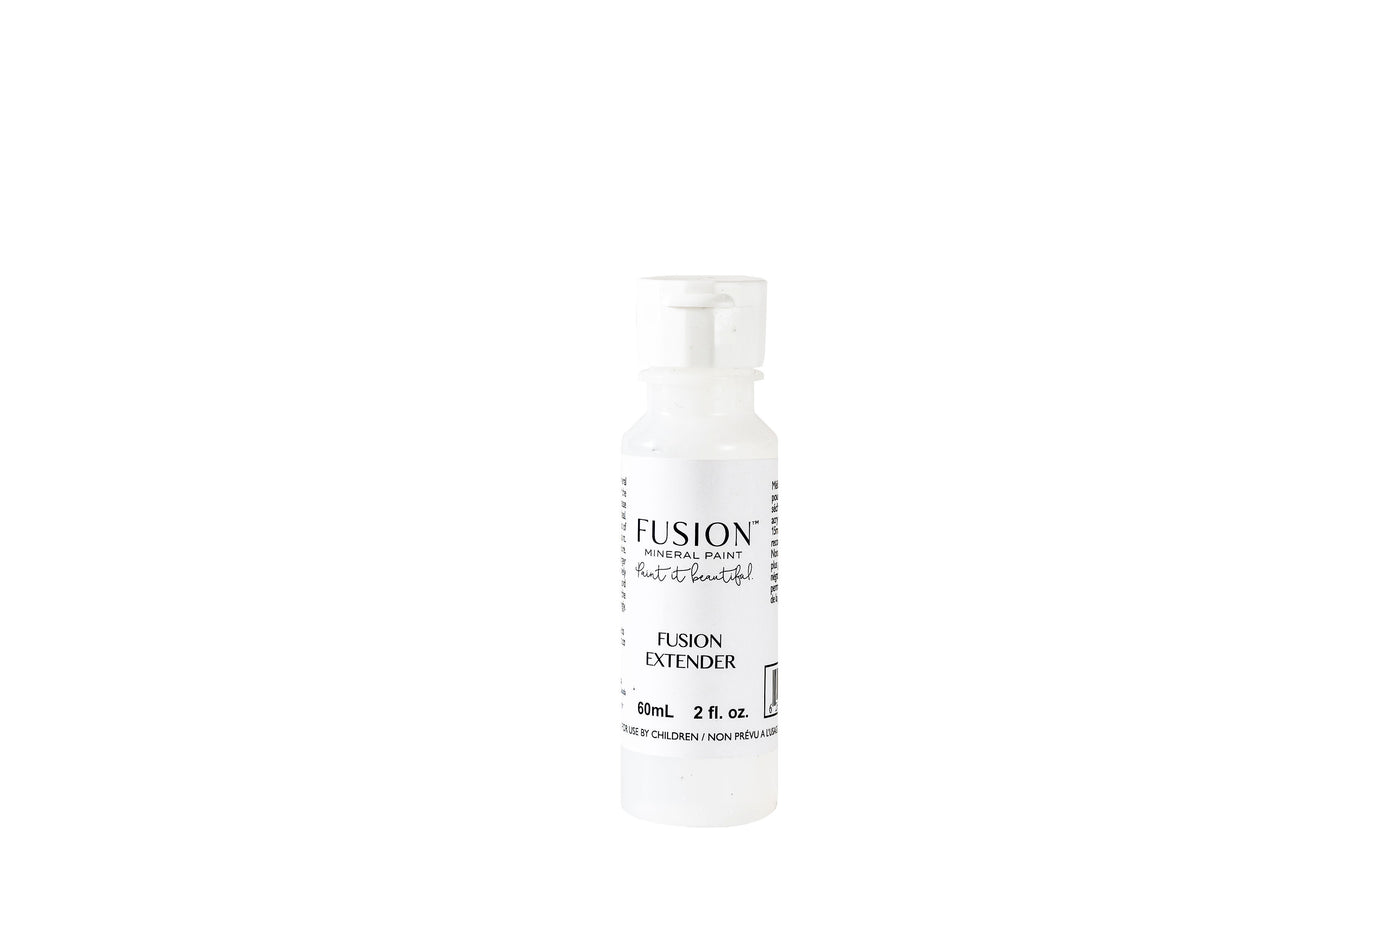 Fusion Extender 60ml paint extender extends drying time For the Love Creations